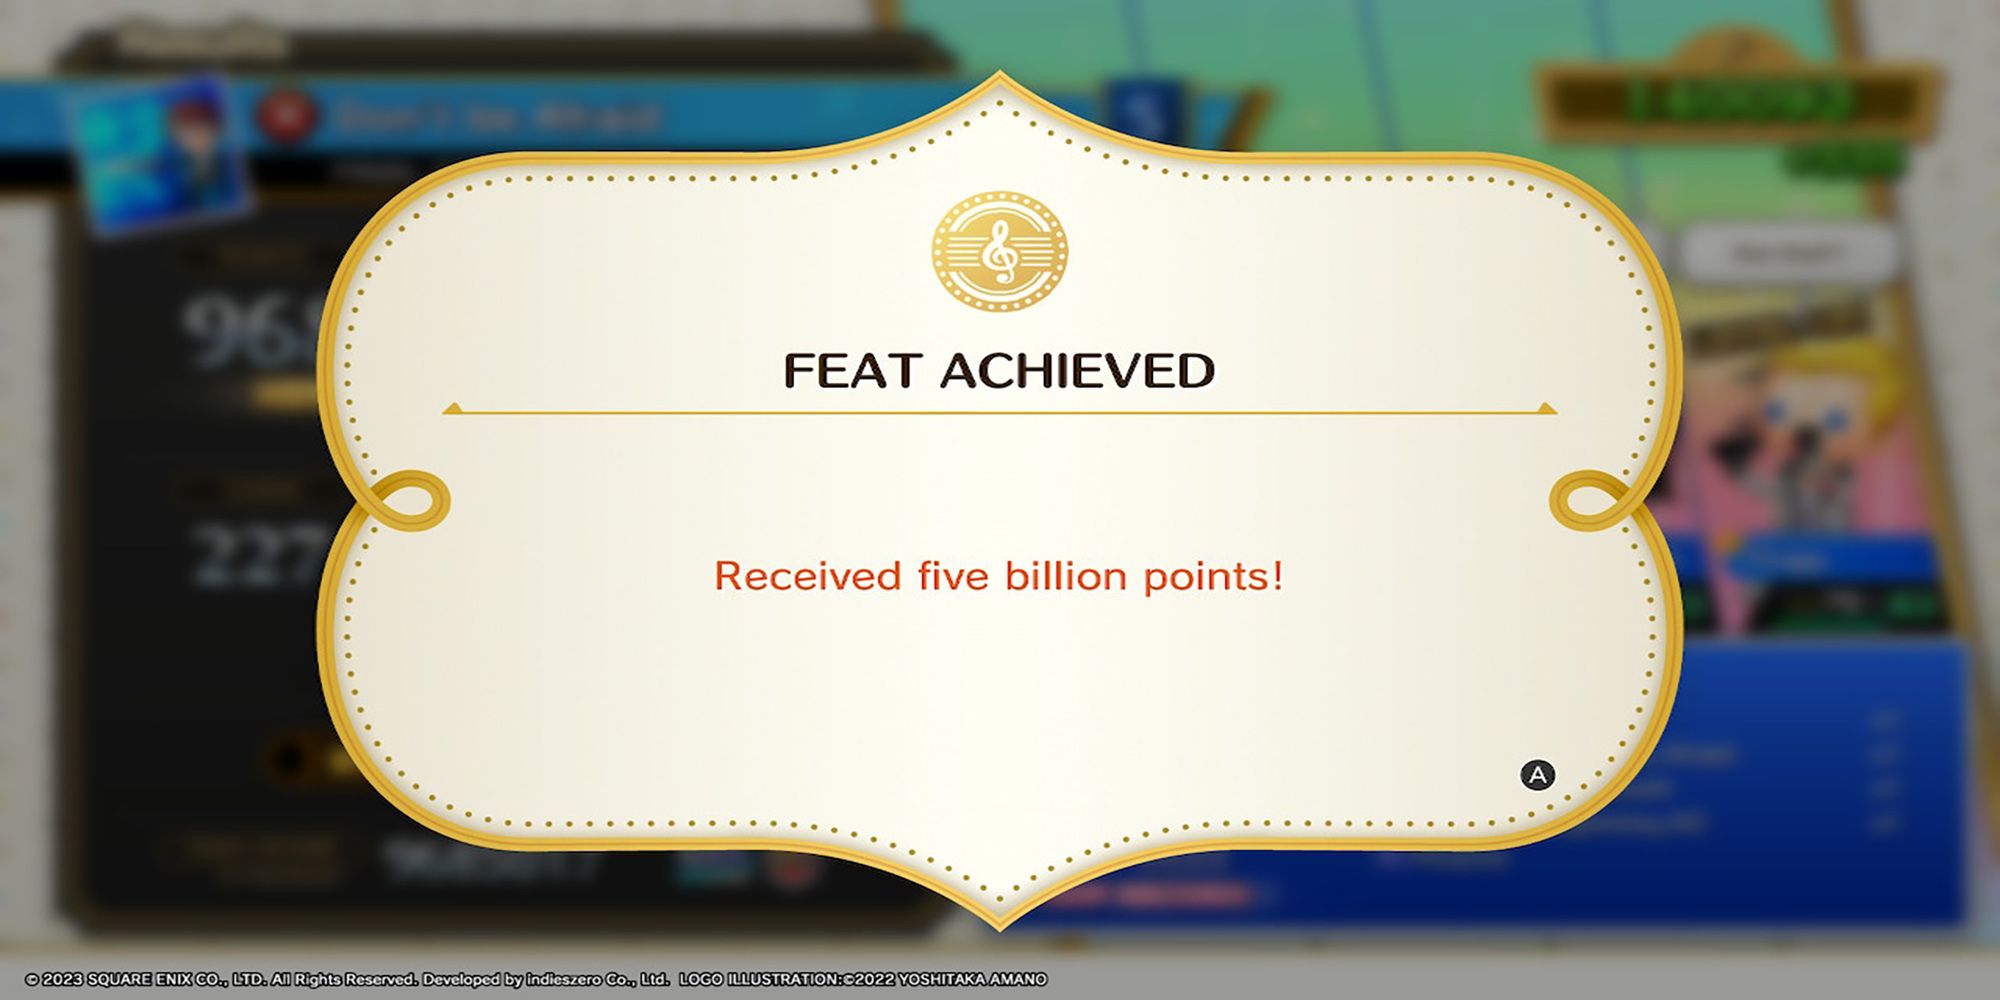 The player achieves the feat "Received five billion points" in Theatrhythm: Final Bar Line